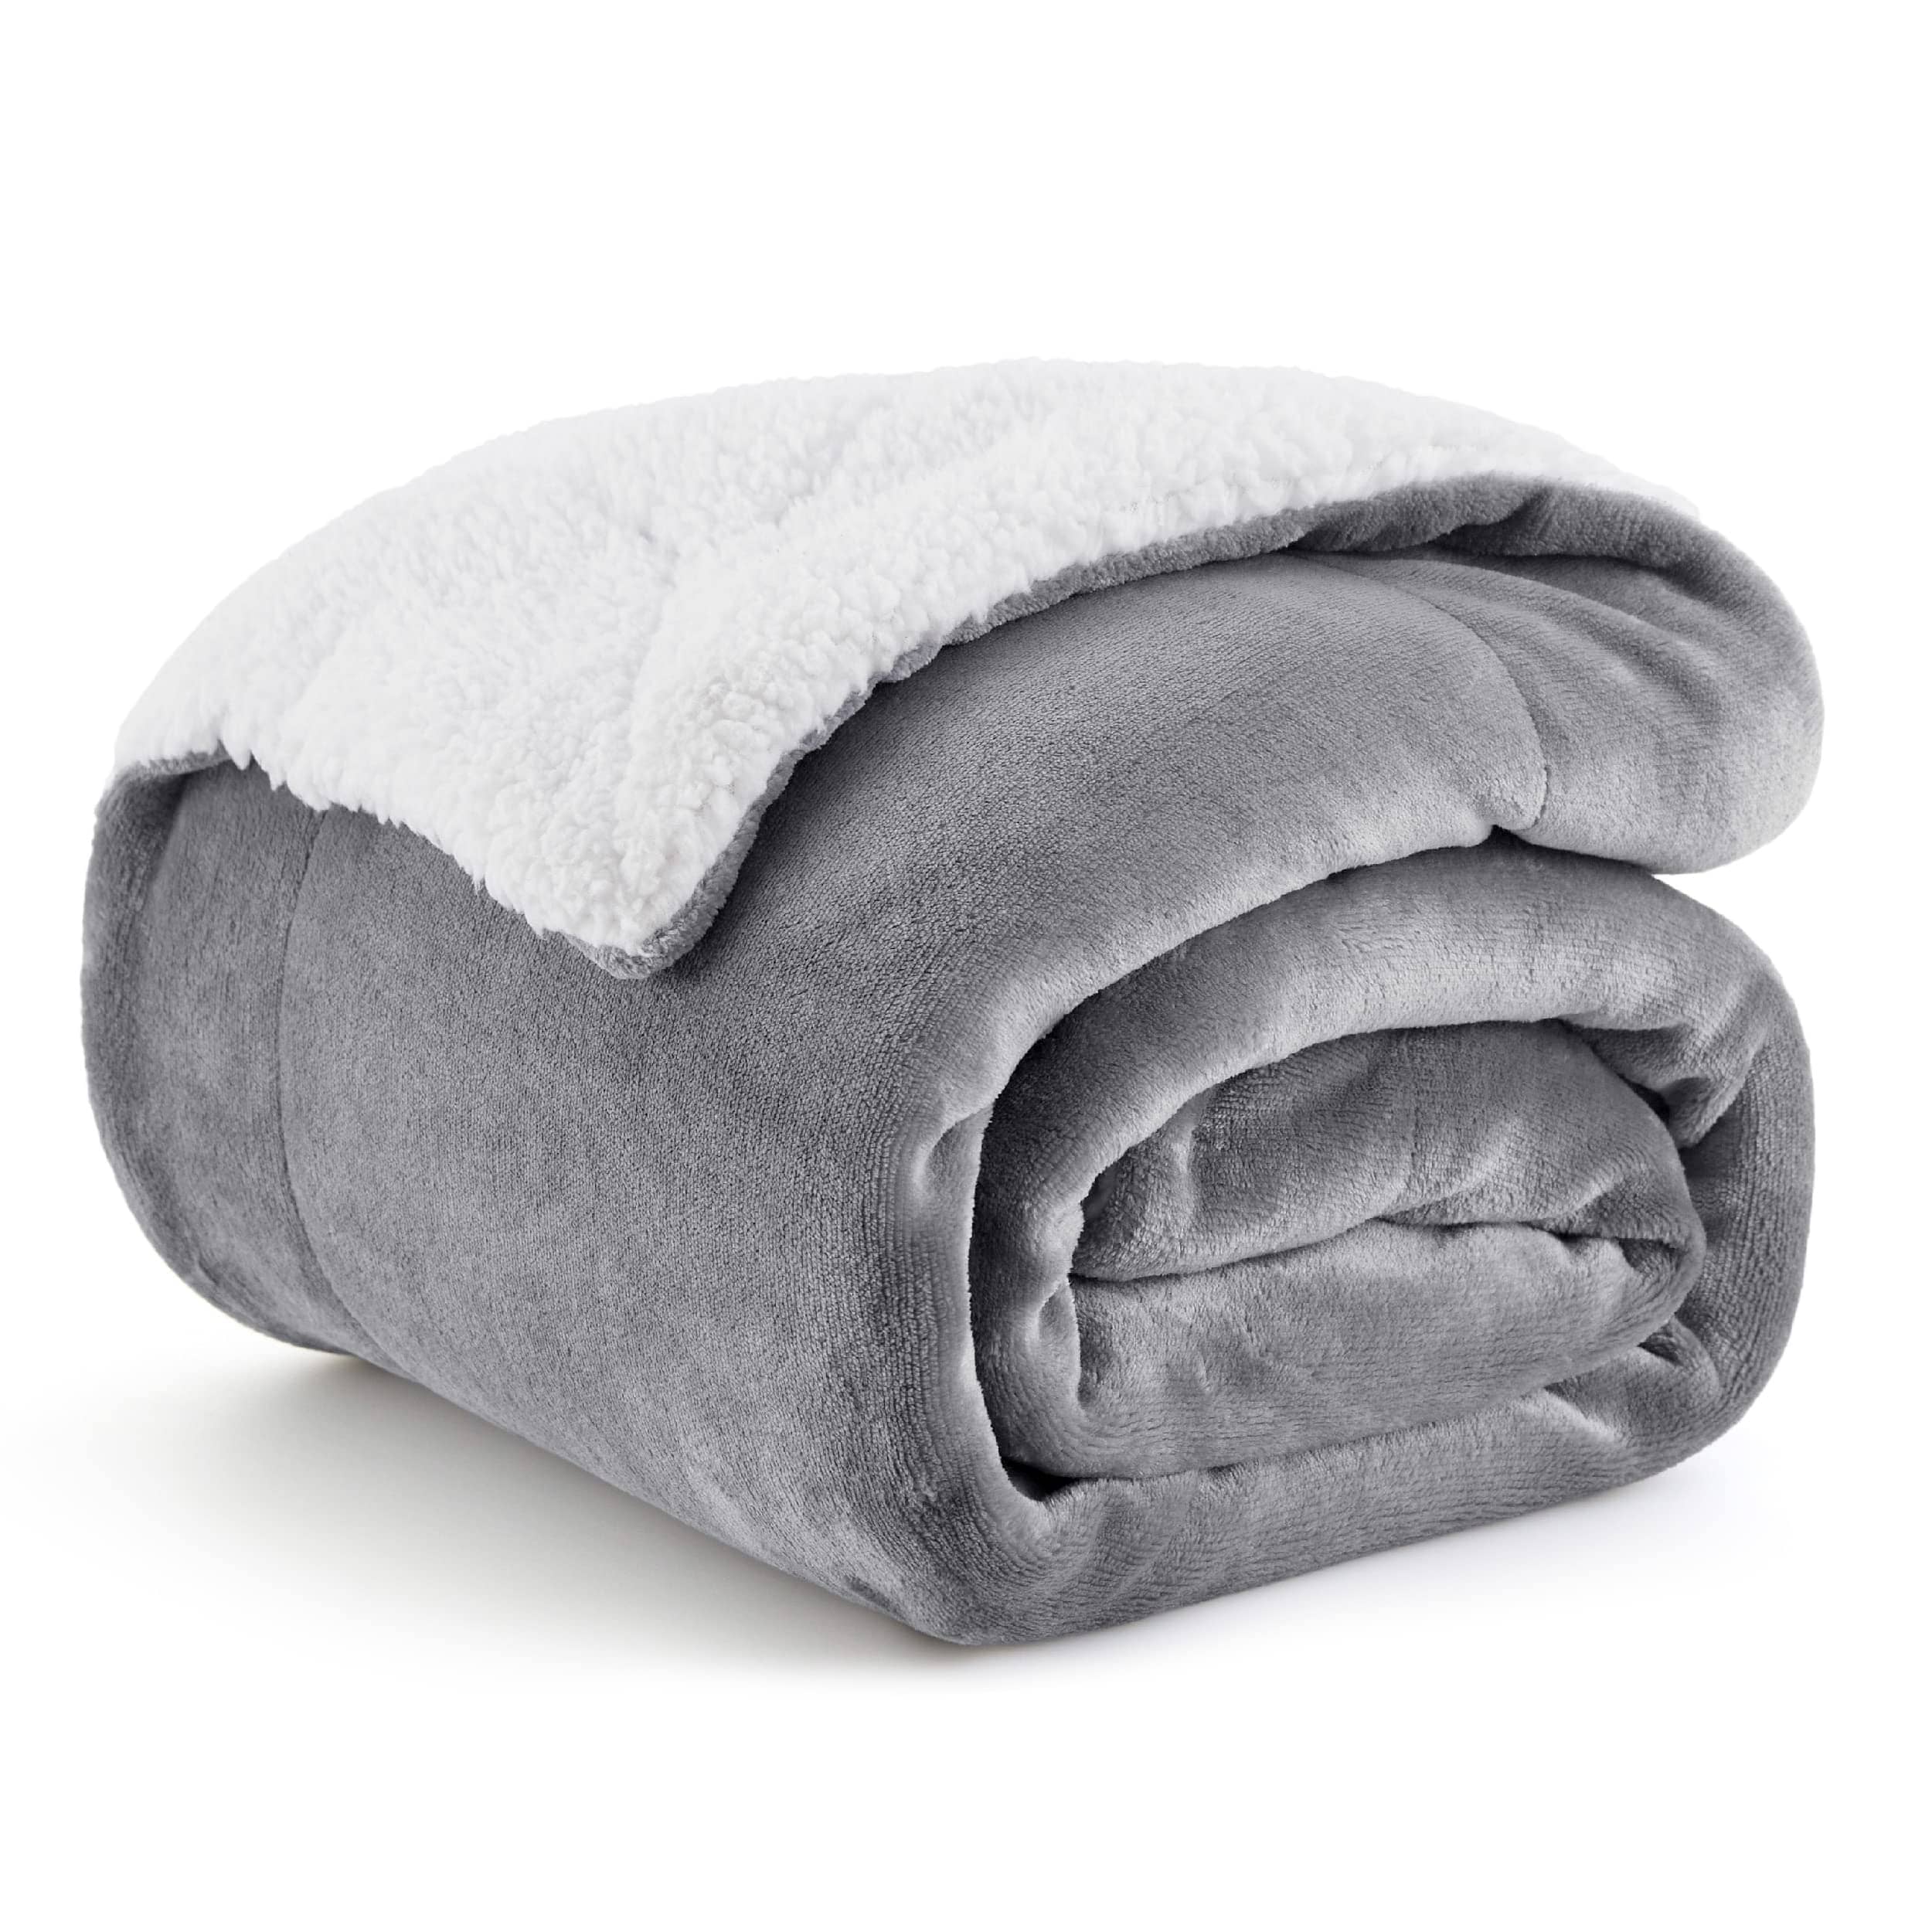 Bedsure Sherpa Fleece King Size Blanket for Bed - Navy Blue Thick Fuzzy Warm Soft Large Blankets King Size 108x90 Inches, King/Cal King